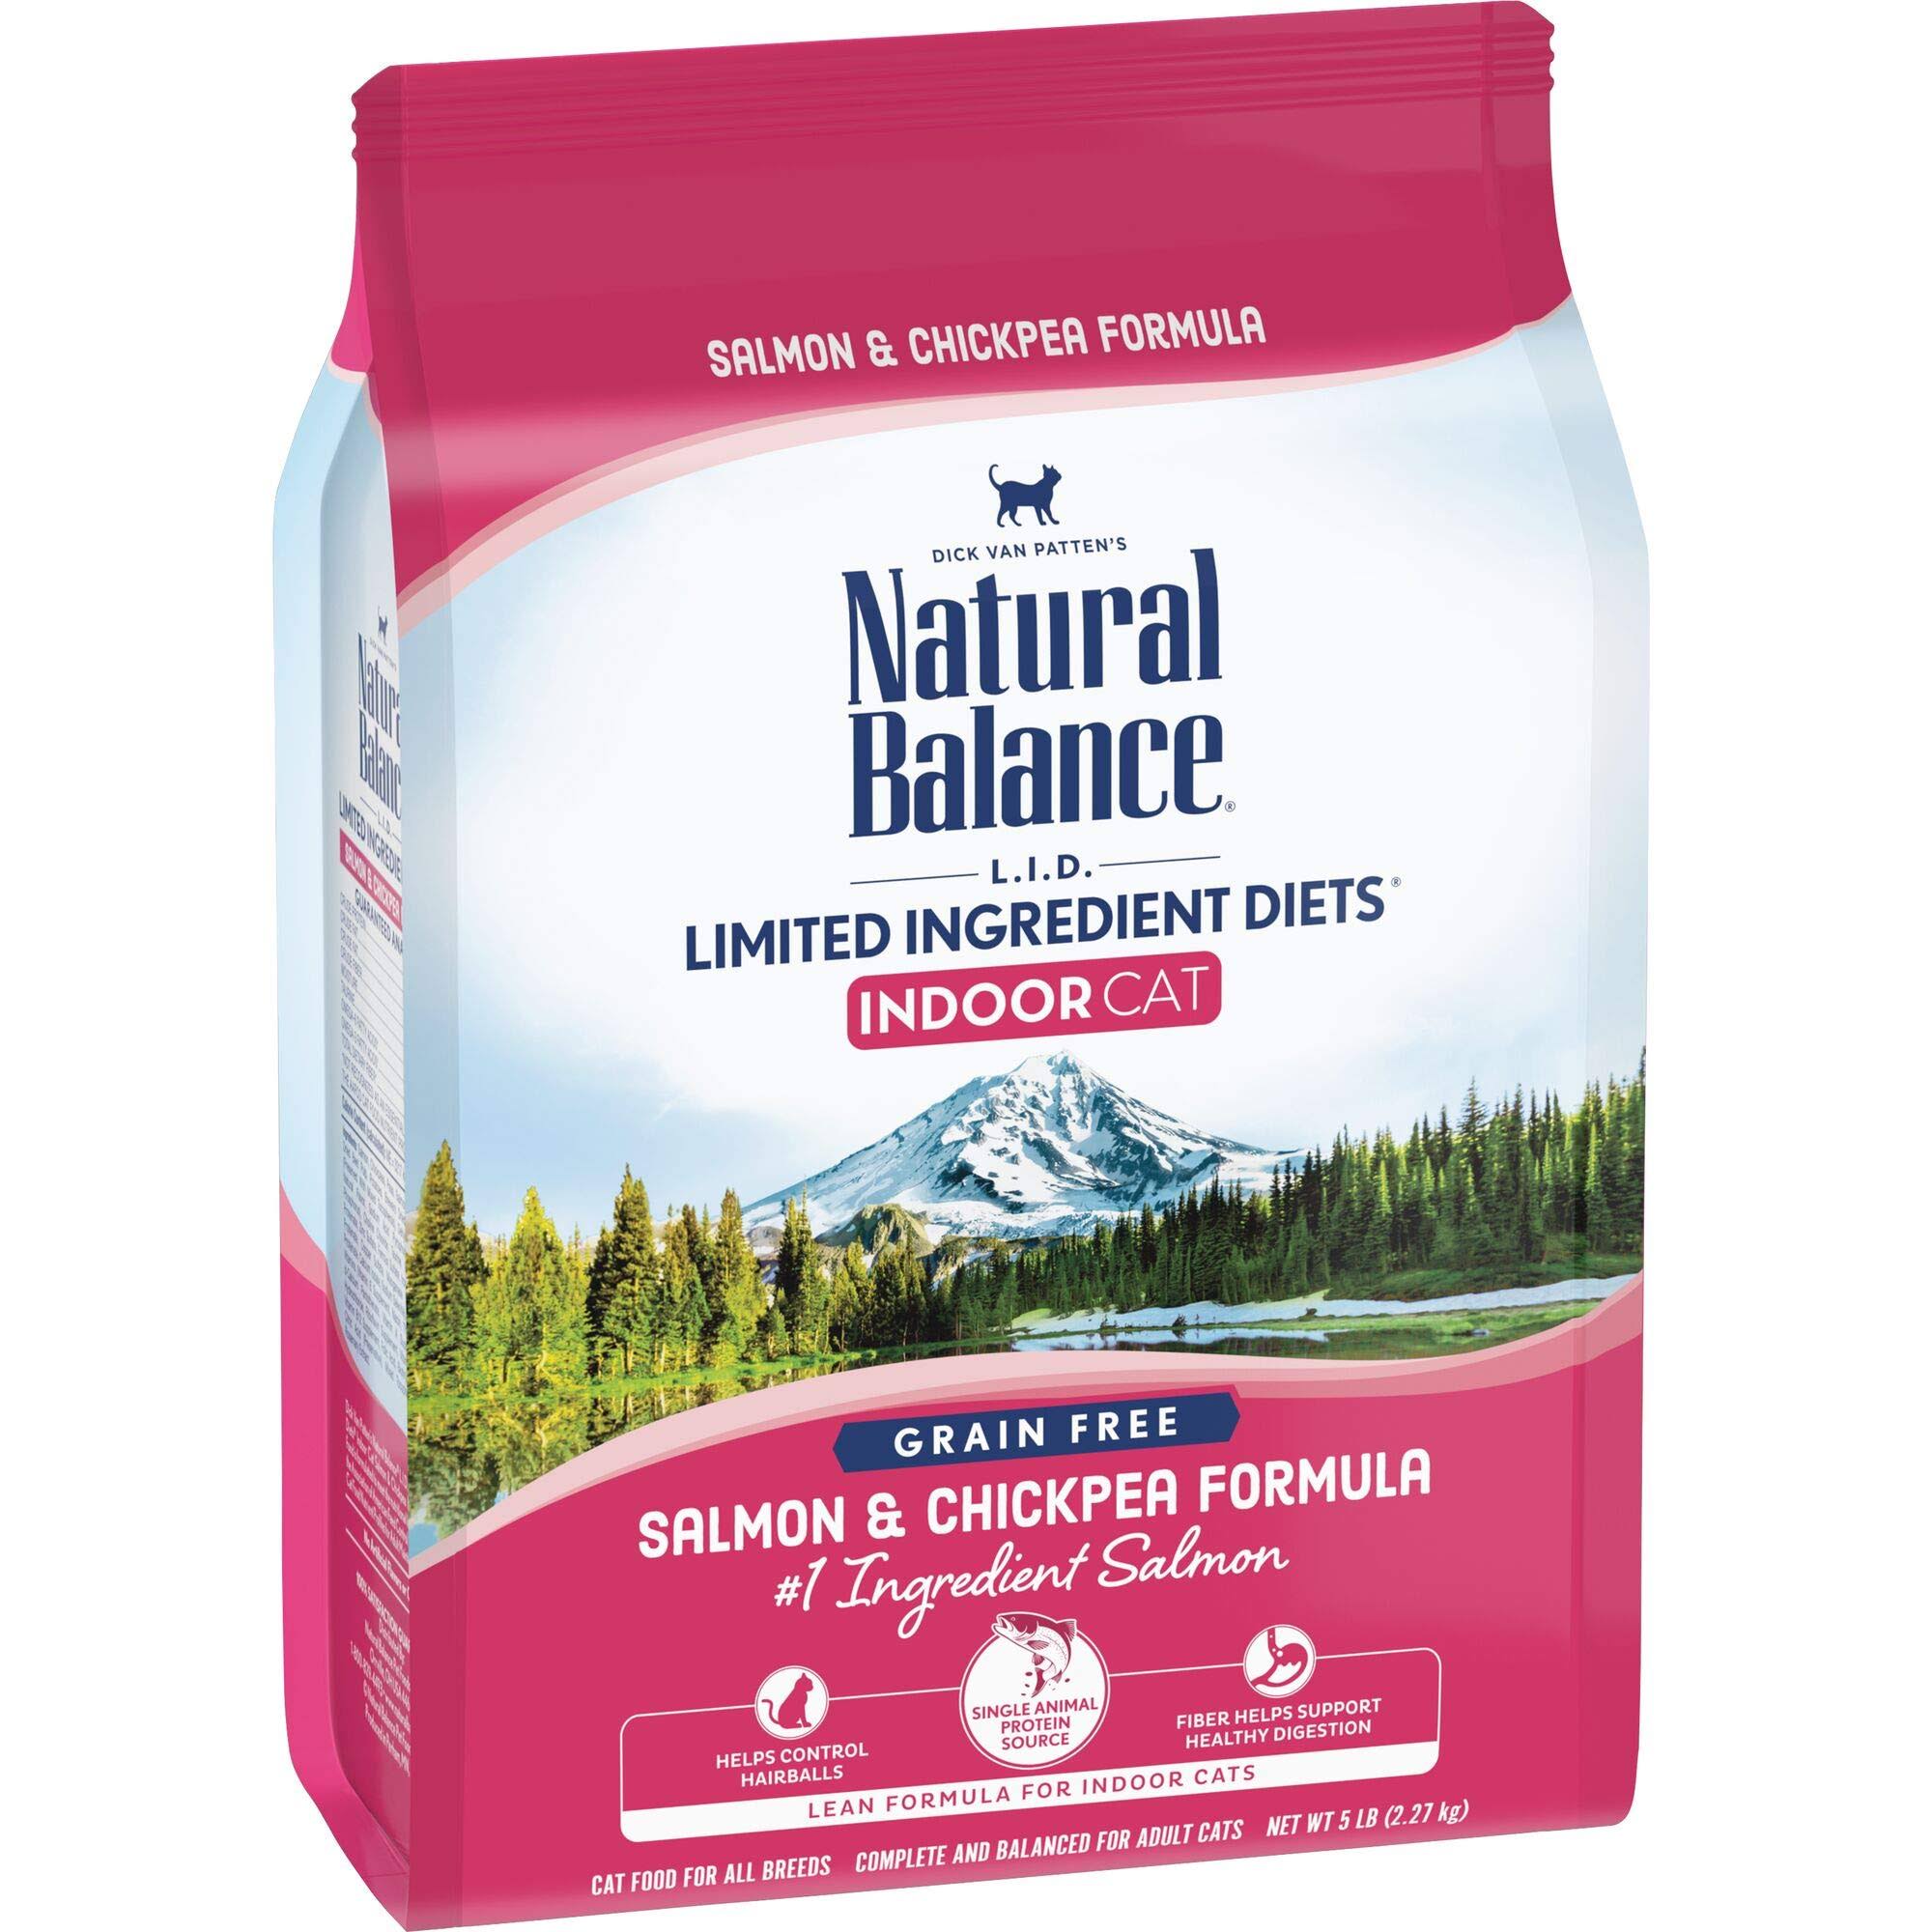 Natural Balance Limited Ingredient Diets Dry Cat Food - Salmon and Chickpea, 5lb